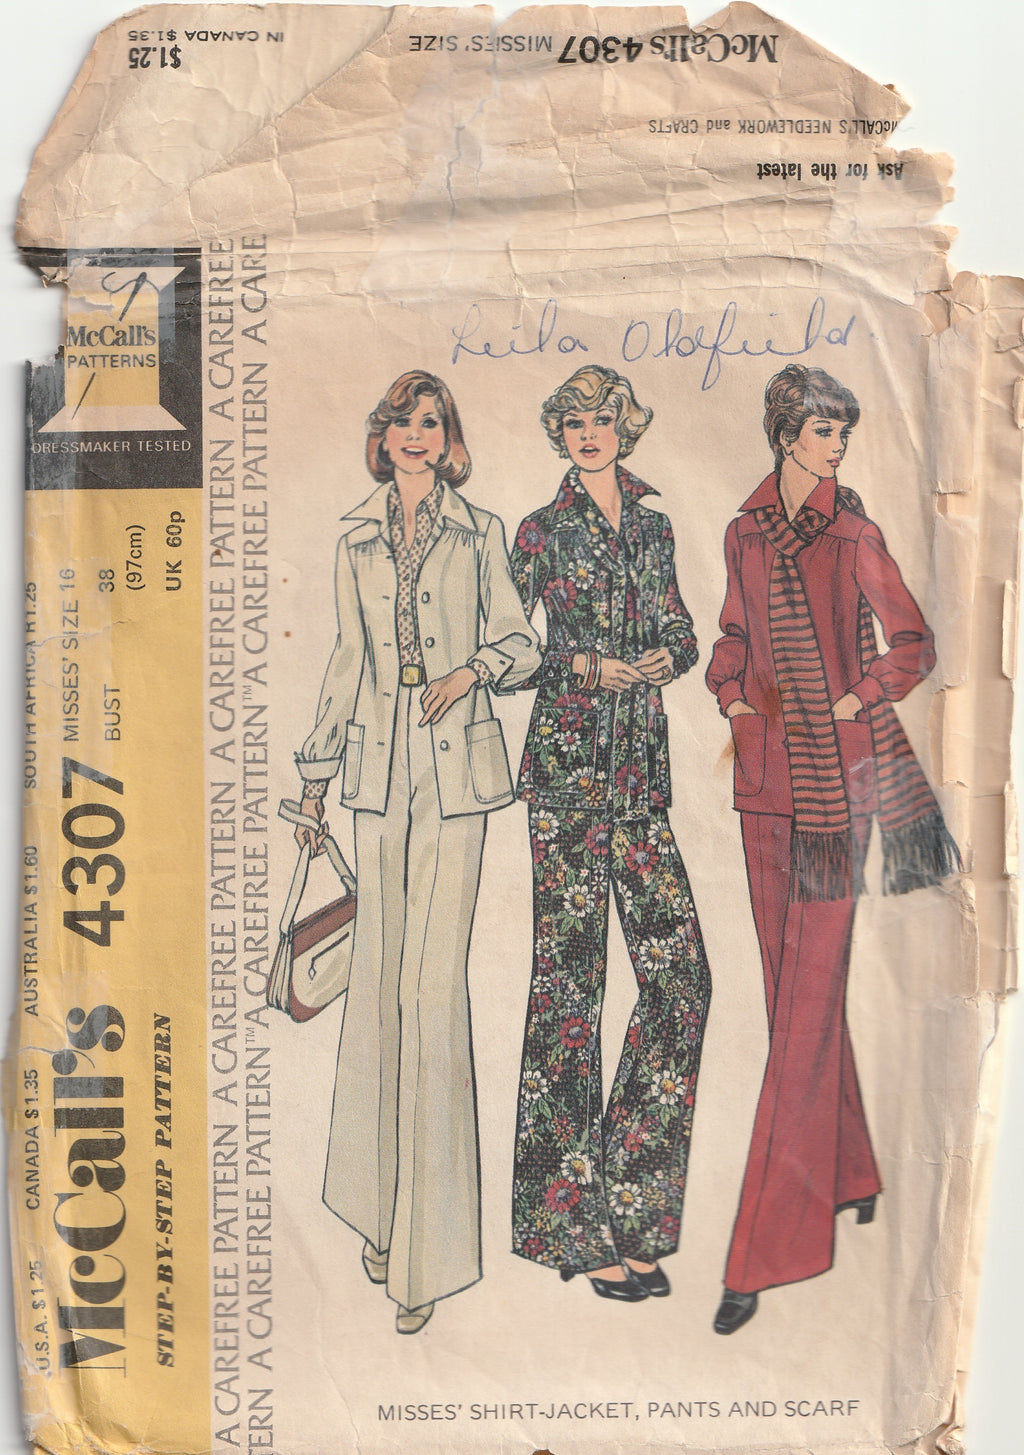 1970s vintage pattern flared pants and shirt jacket medium McCall's 4307 1974